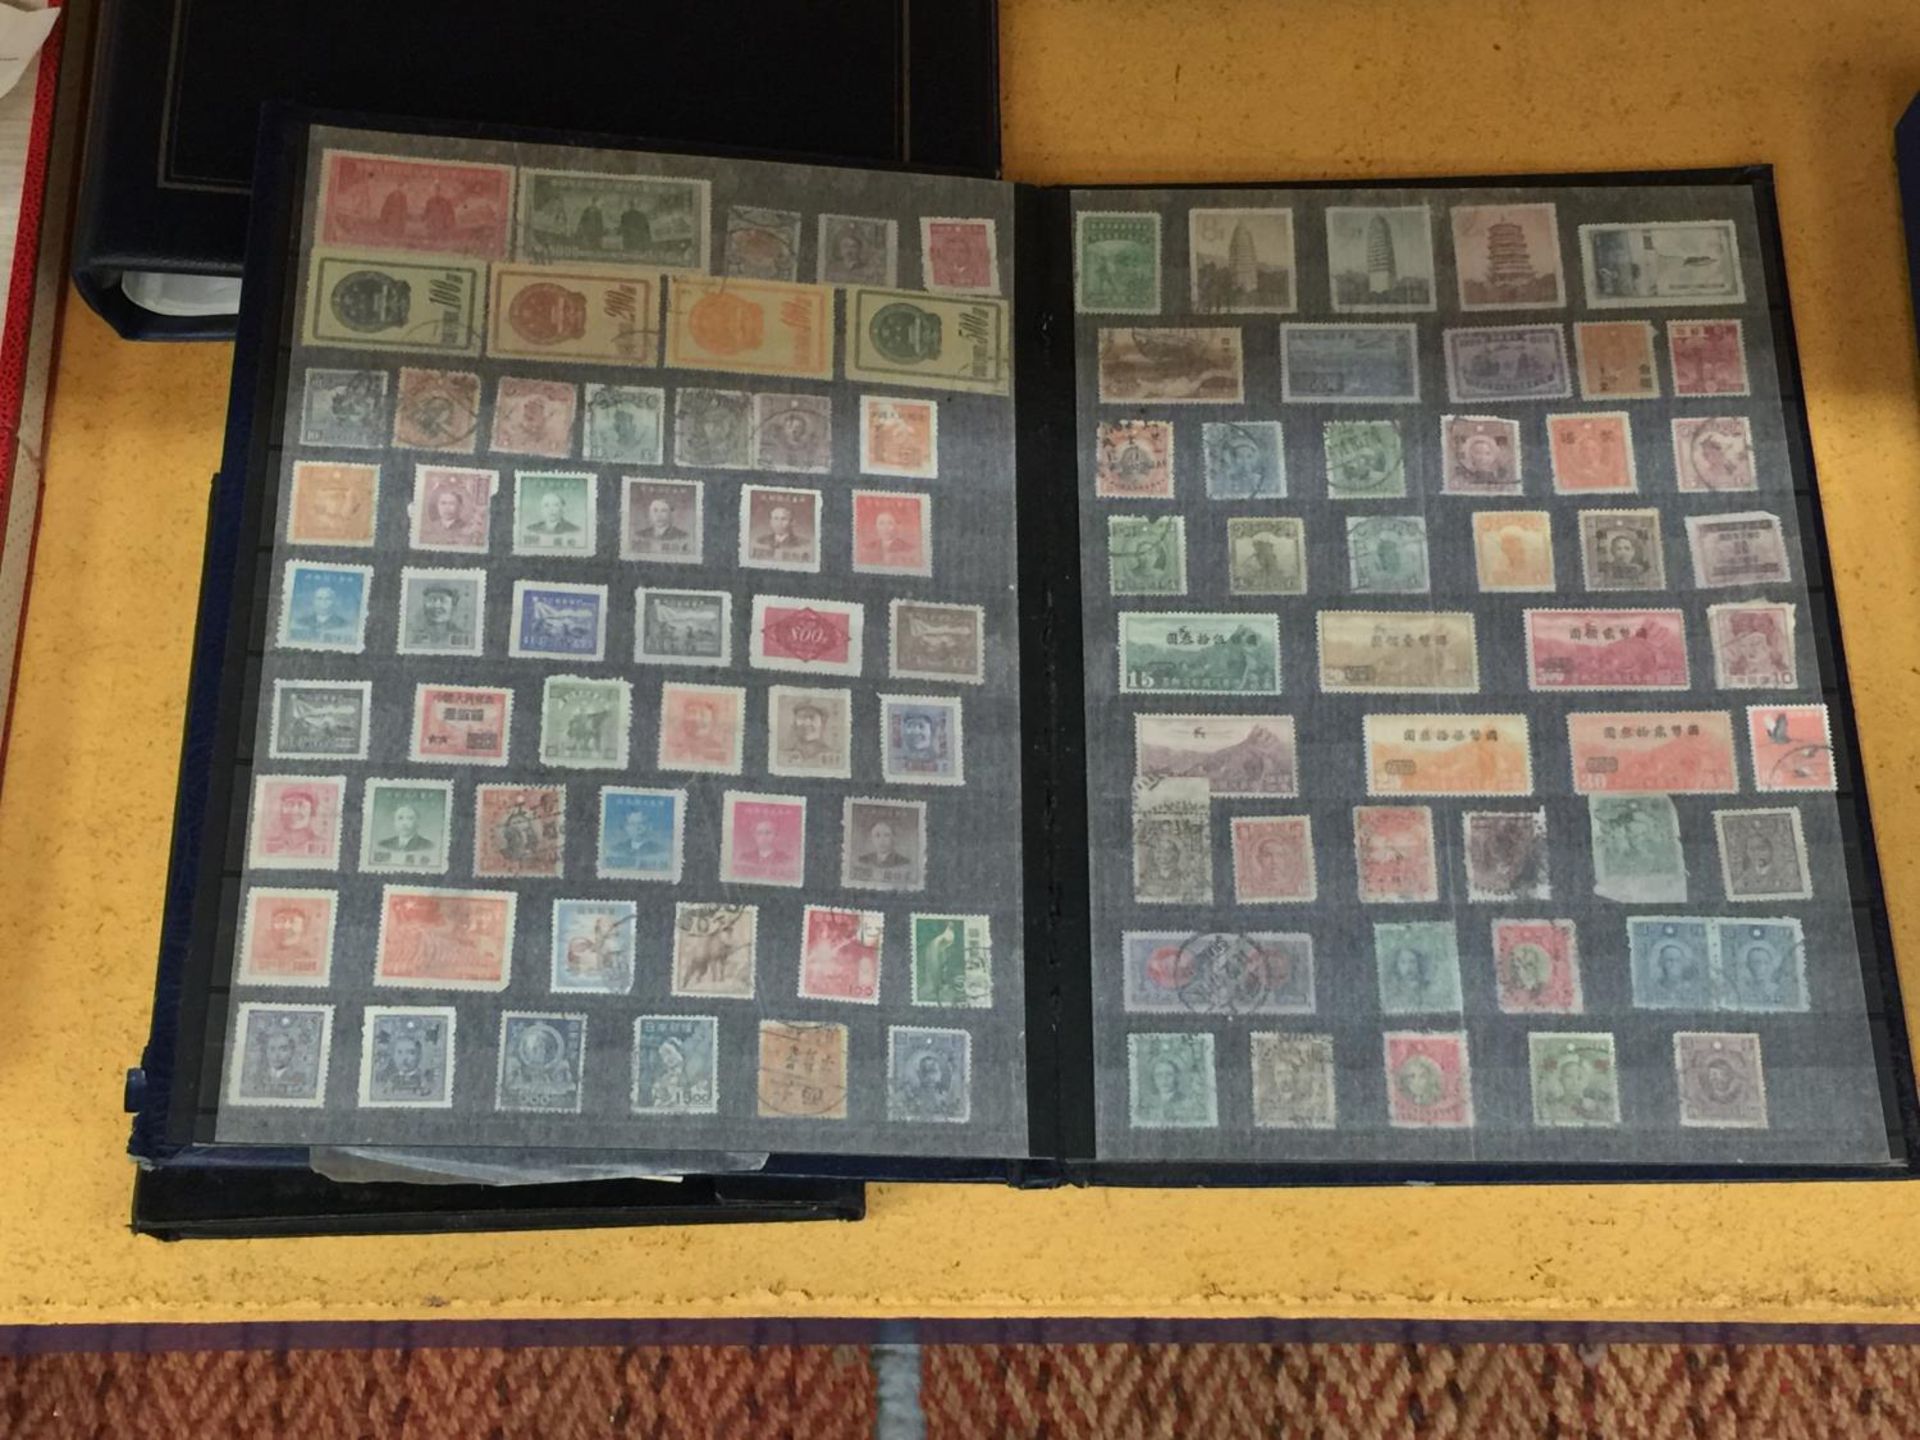 AN ALBUM CONTAINING RARE AND COLLECTABLE MOSTLY ASIAN STAMPS